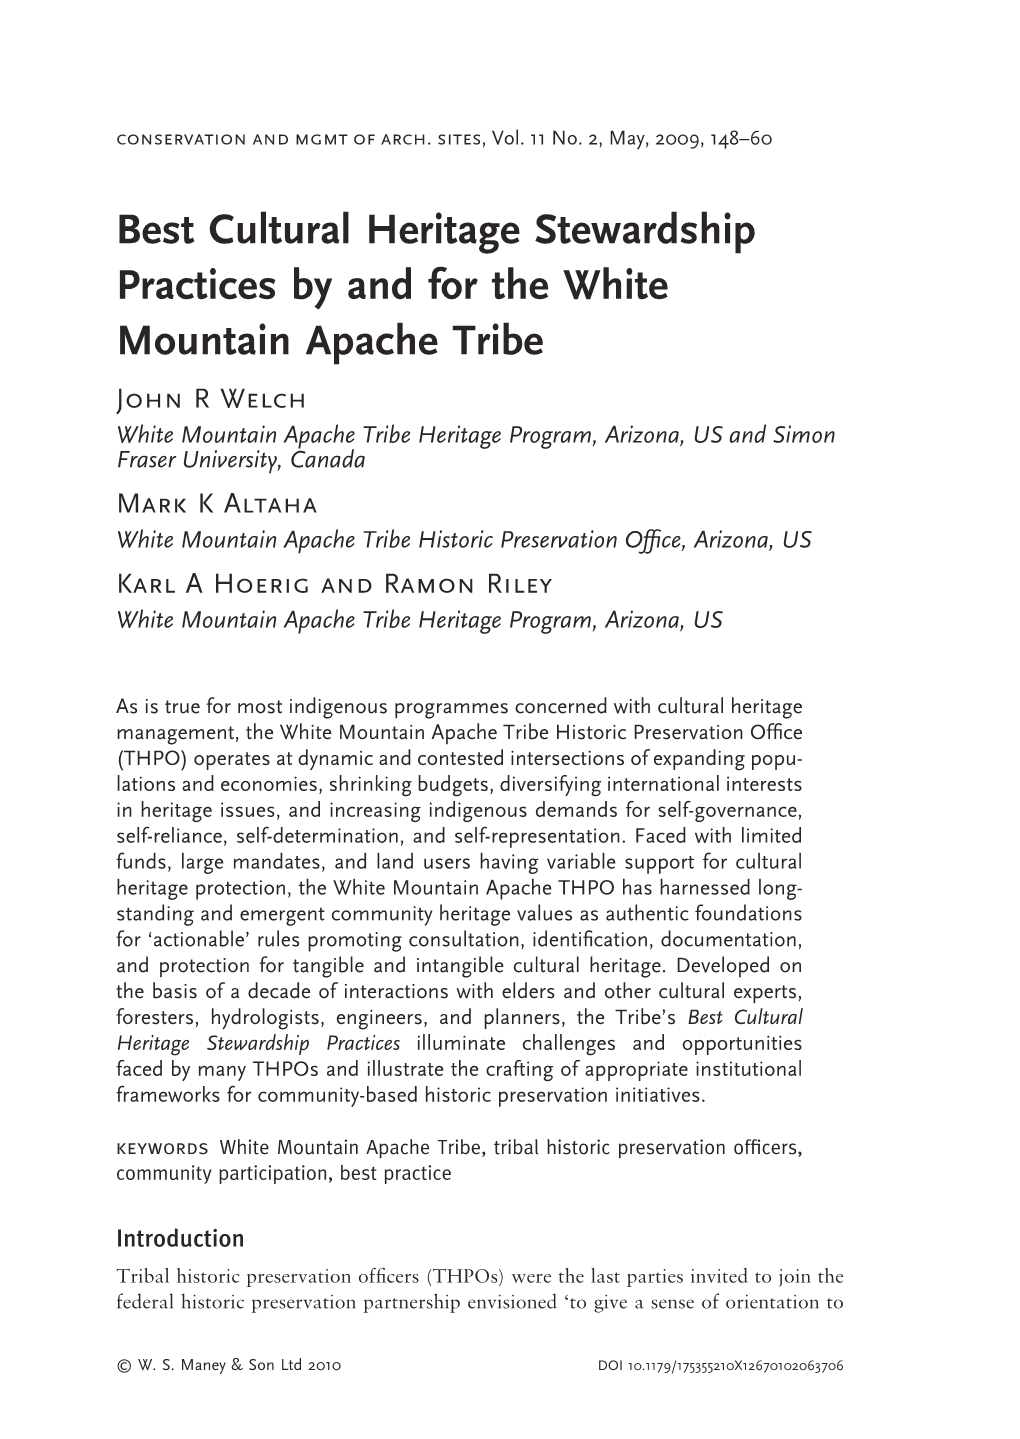 Best Cultural Heritage Stewardship Practices by and for the White